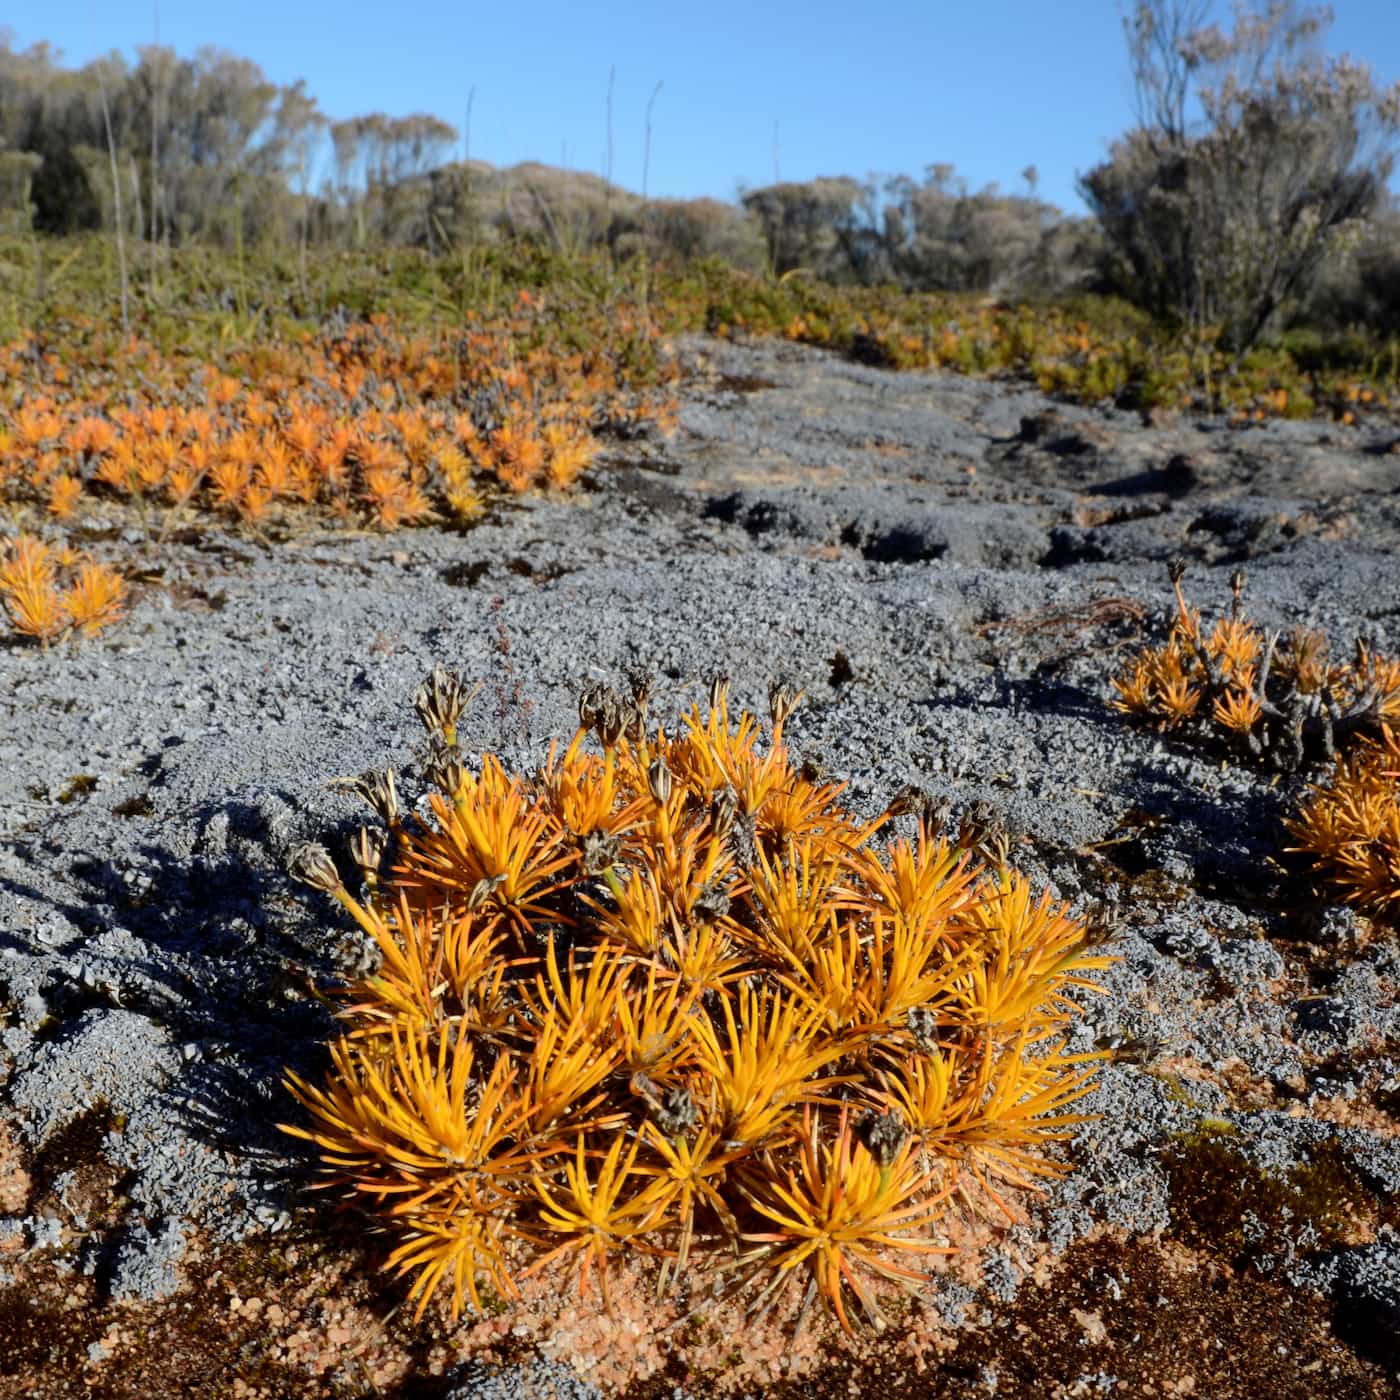 Small yellow plant in foreground of large granite outcrop